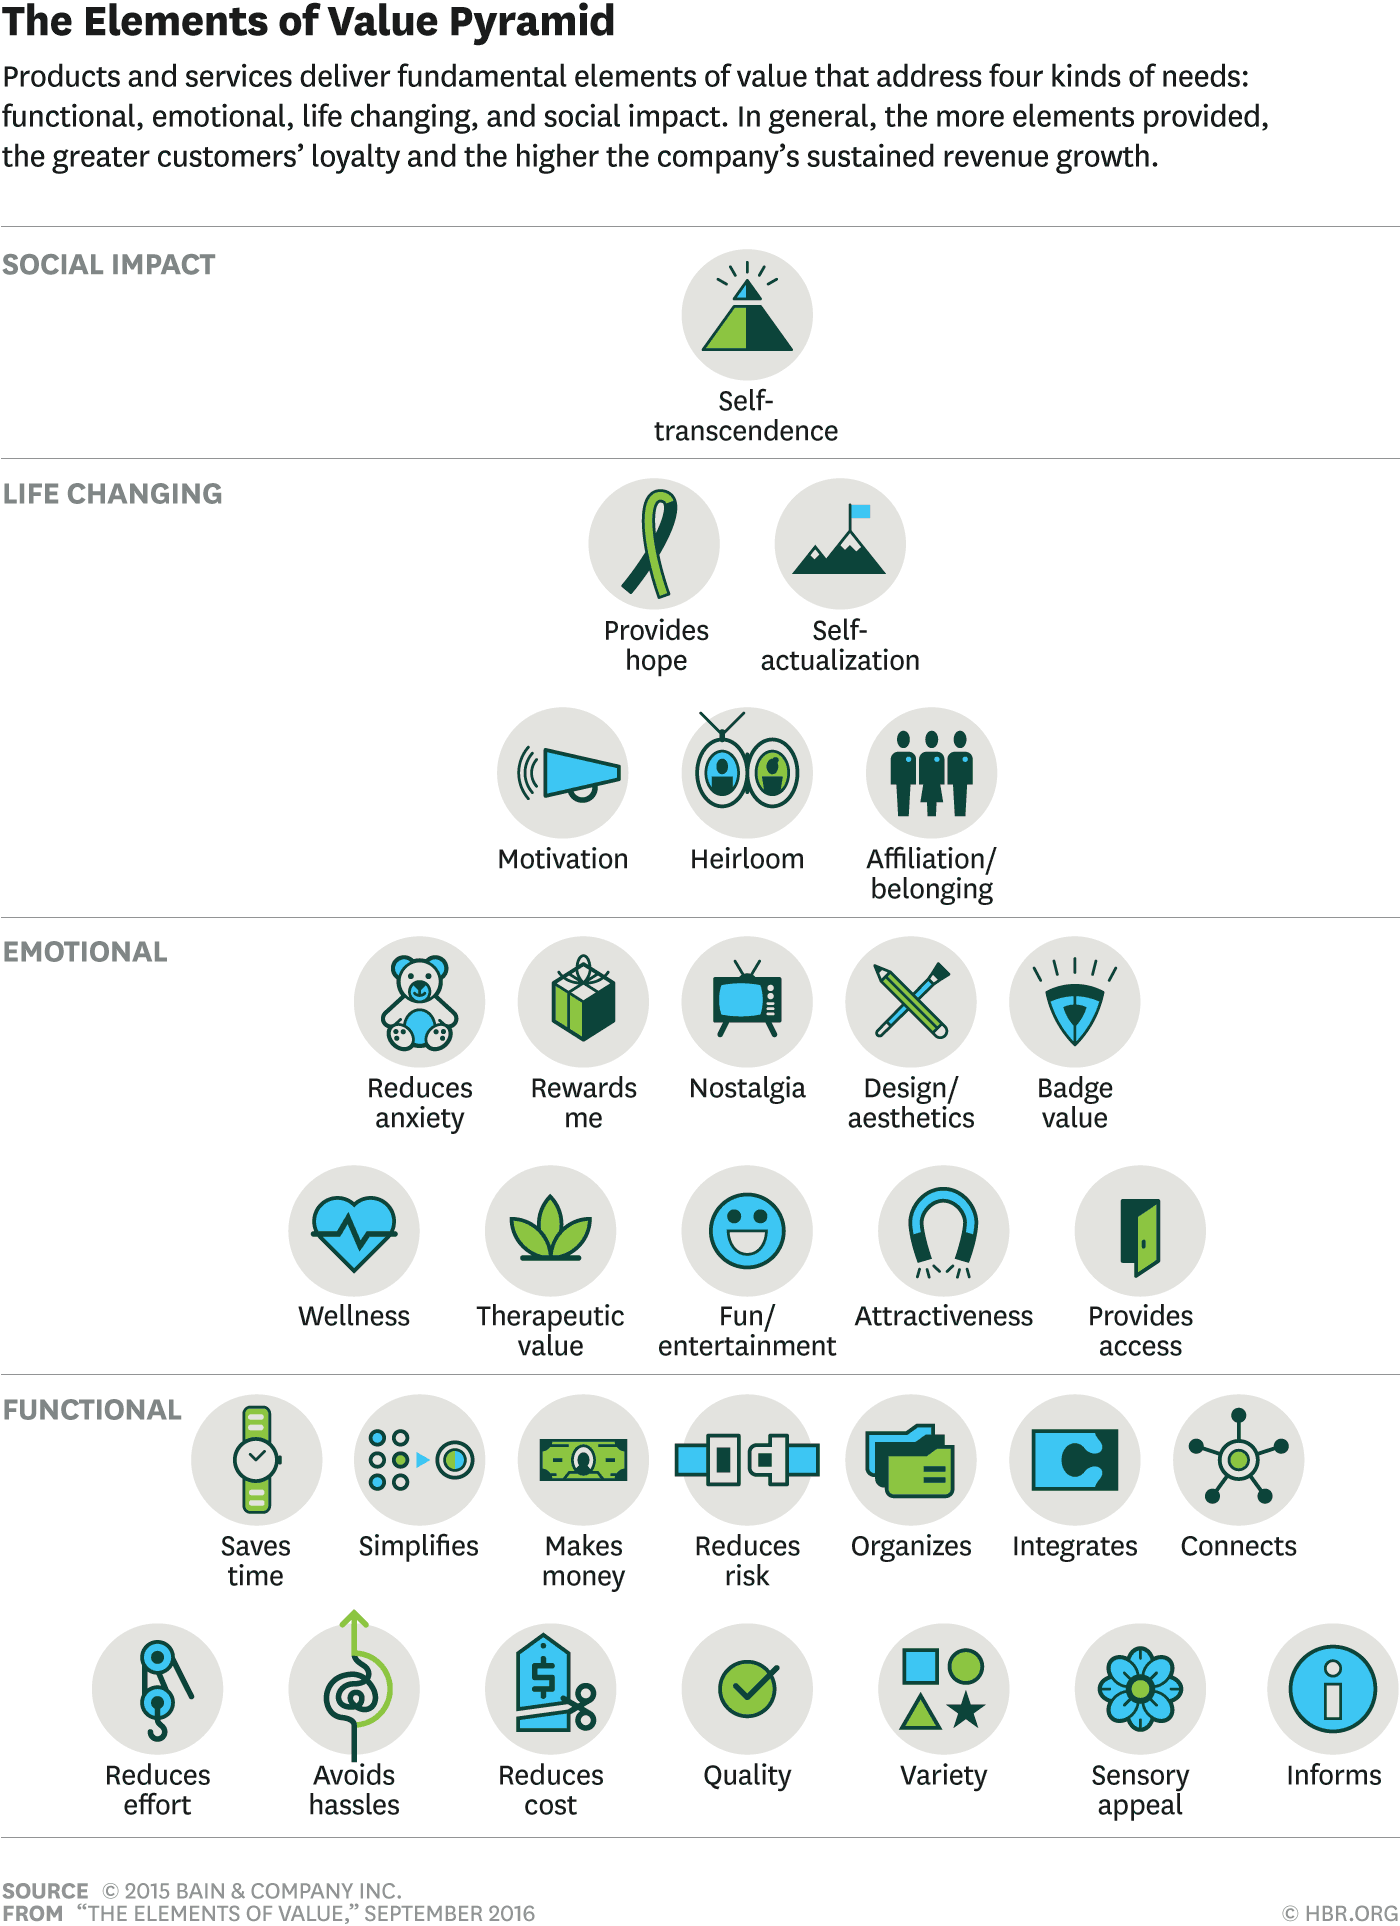 Harvard Business Review Elements of a Value Pyramid for consumer loyalty